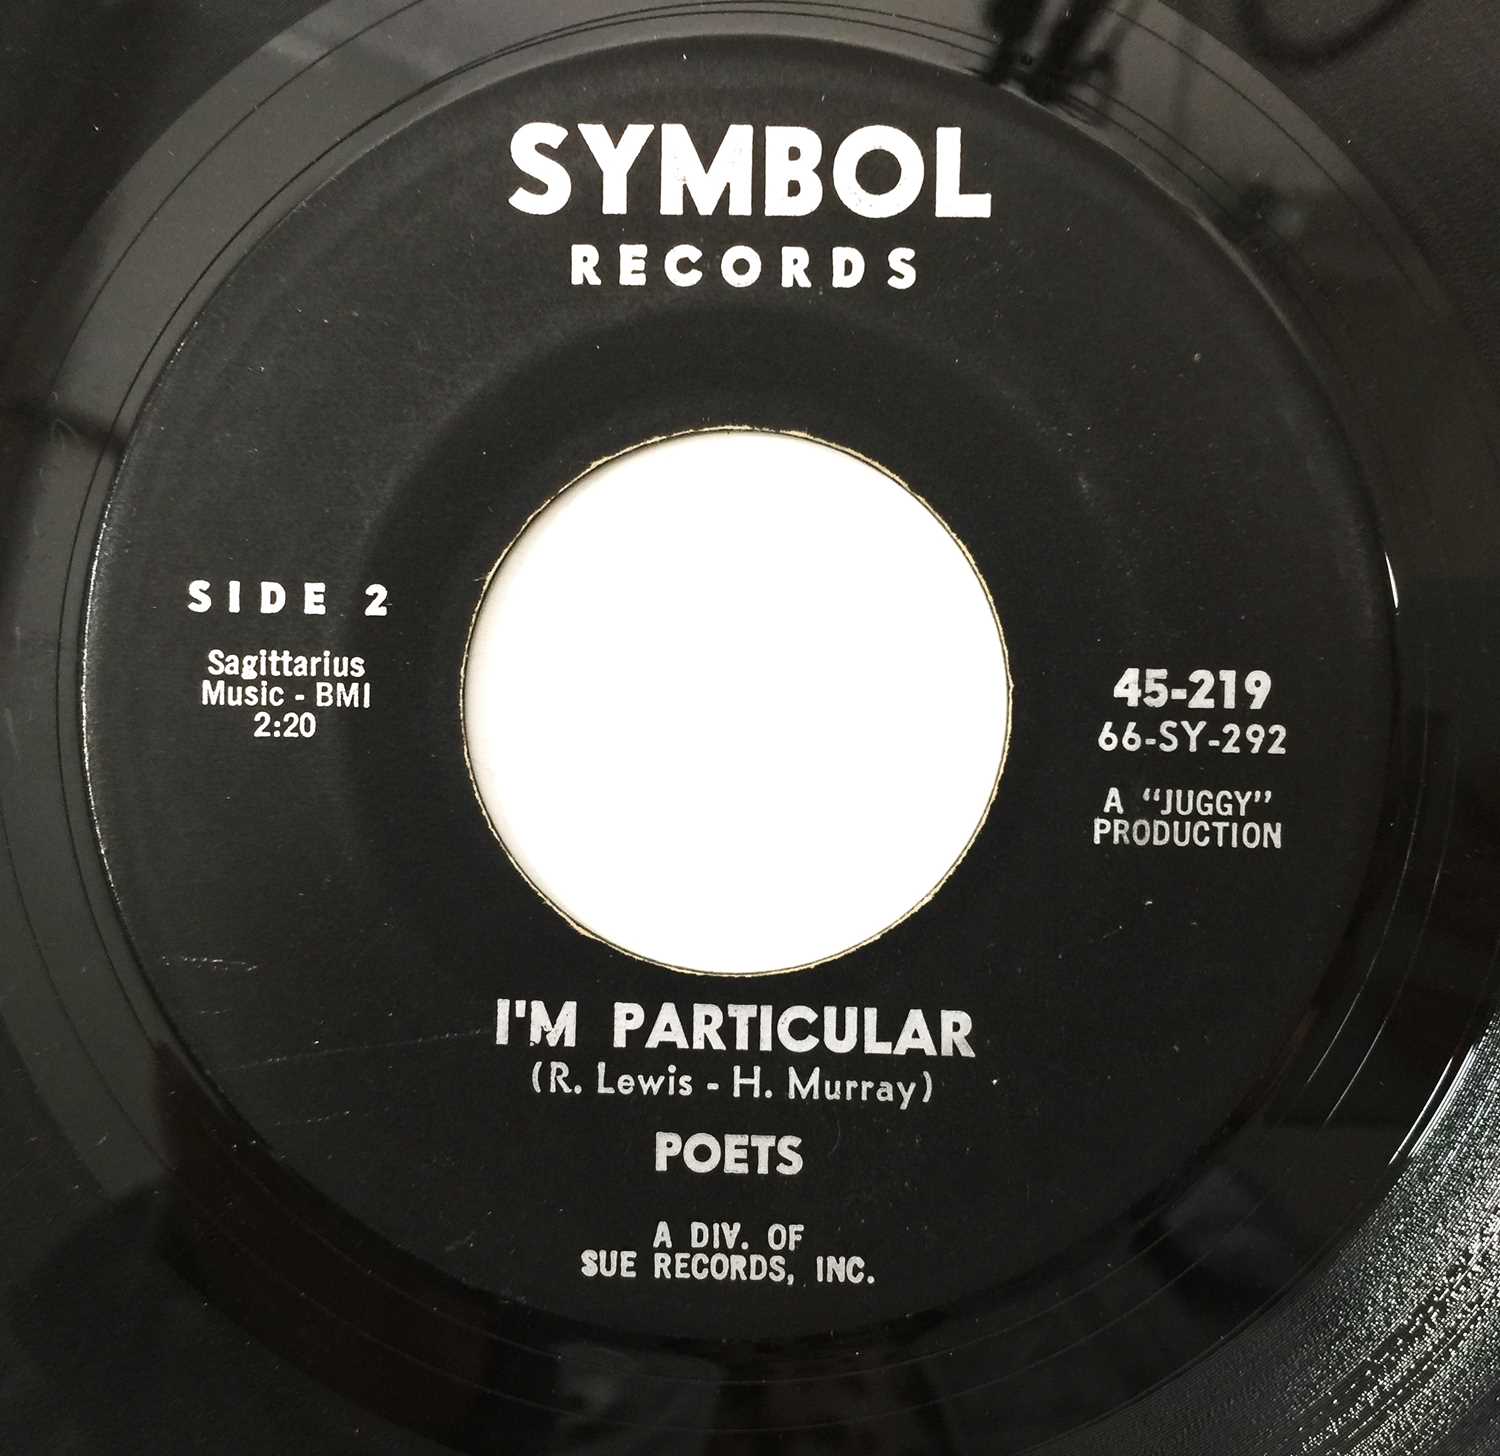 THE POETS - I'VE GOT TWO HEARTS/ I'M PARTICULAR 7" (US STOCK - SYMBOL RECORDS - 45-219) - Image 2 of 2